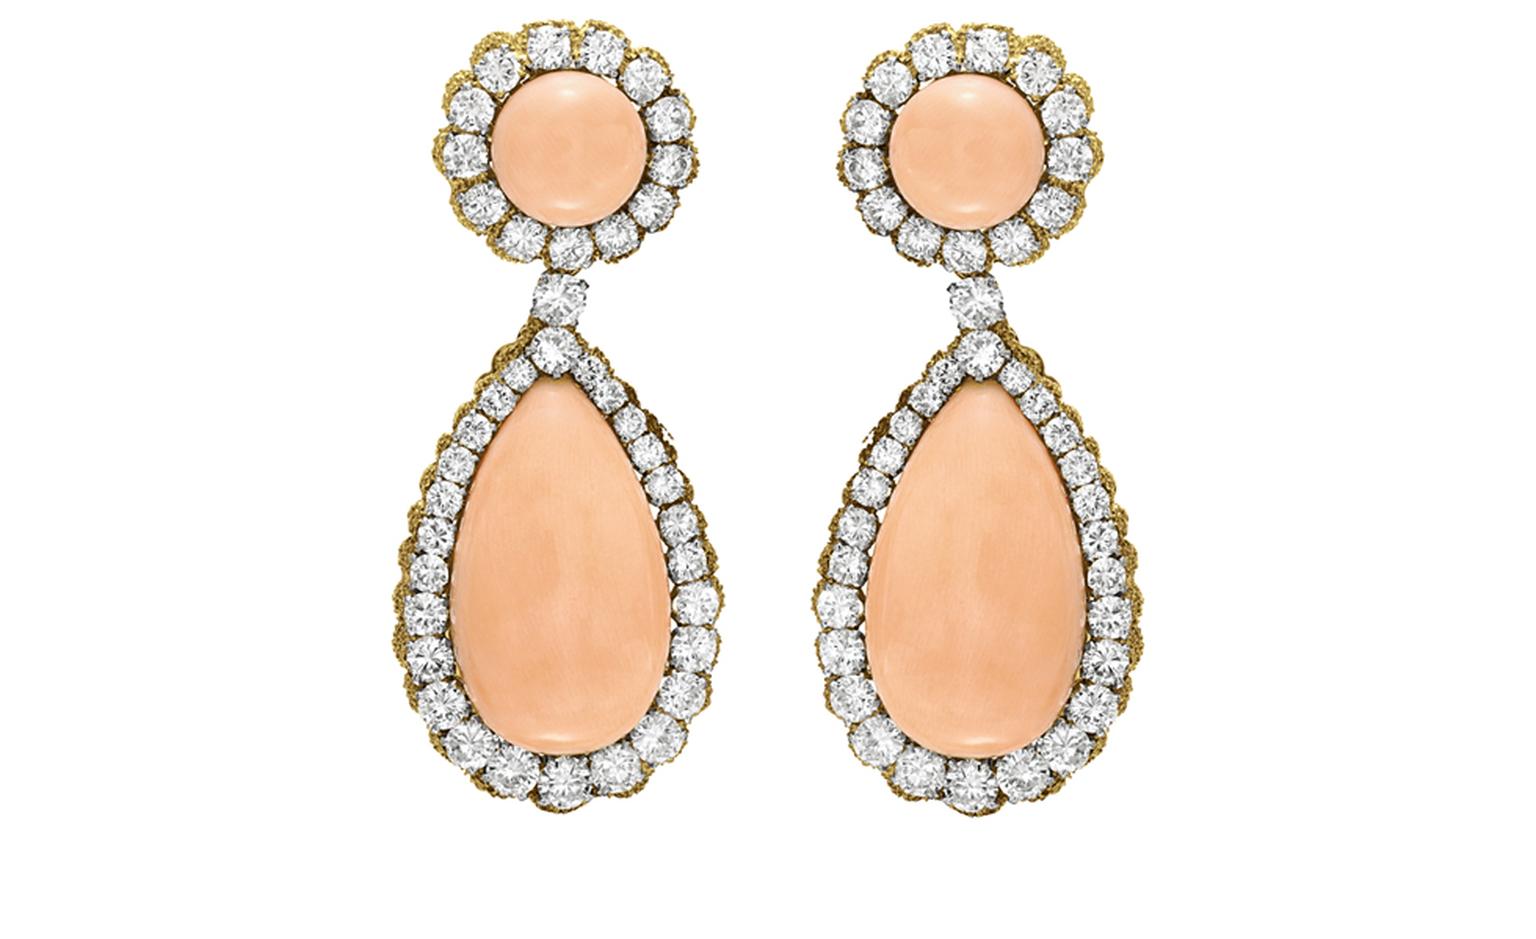 Van Cleef & Arpels. Larmes Coral, Diamond and Yellow Gold ear pendants (1969). © Christie’s Images 2011. POA.